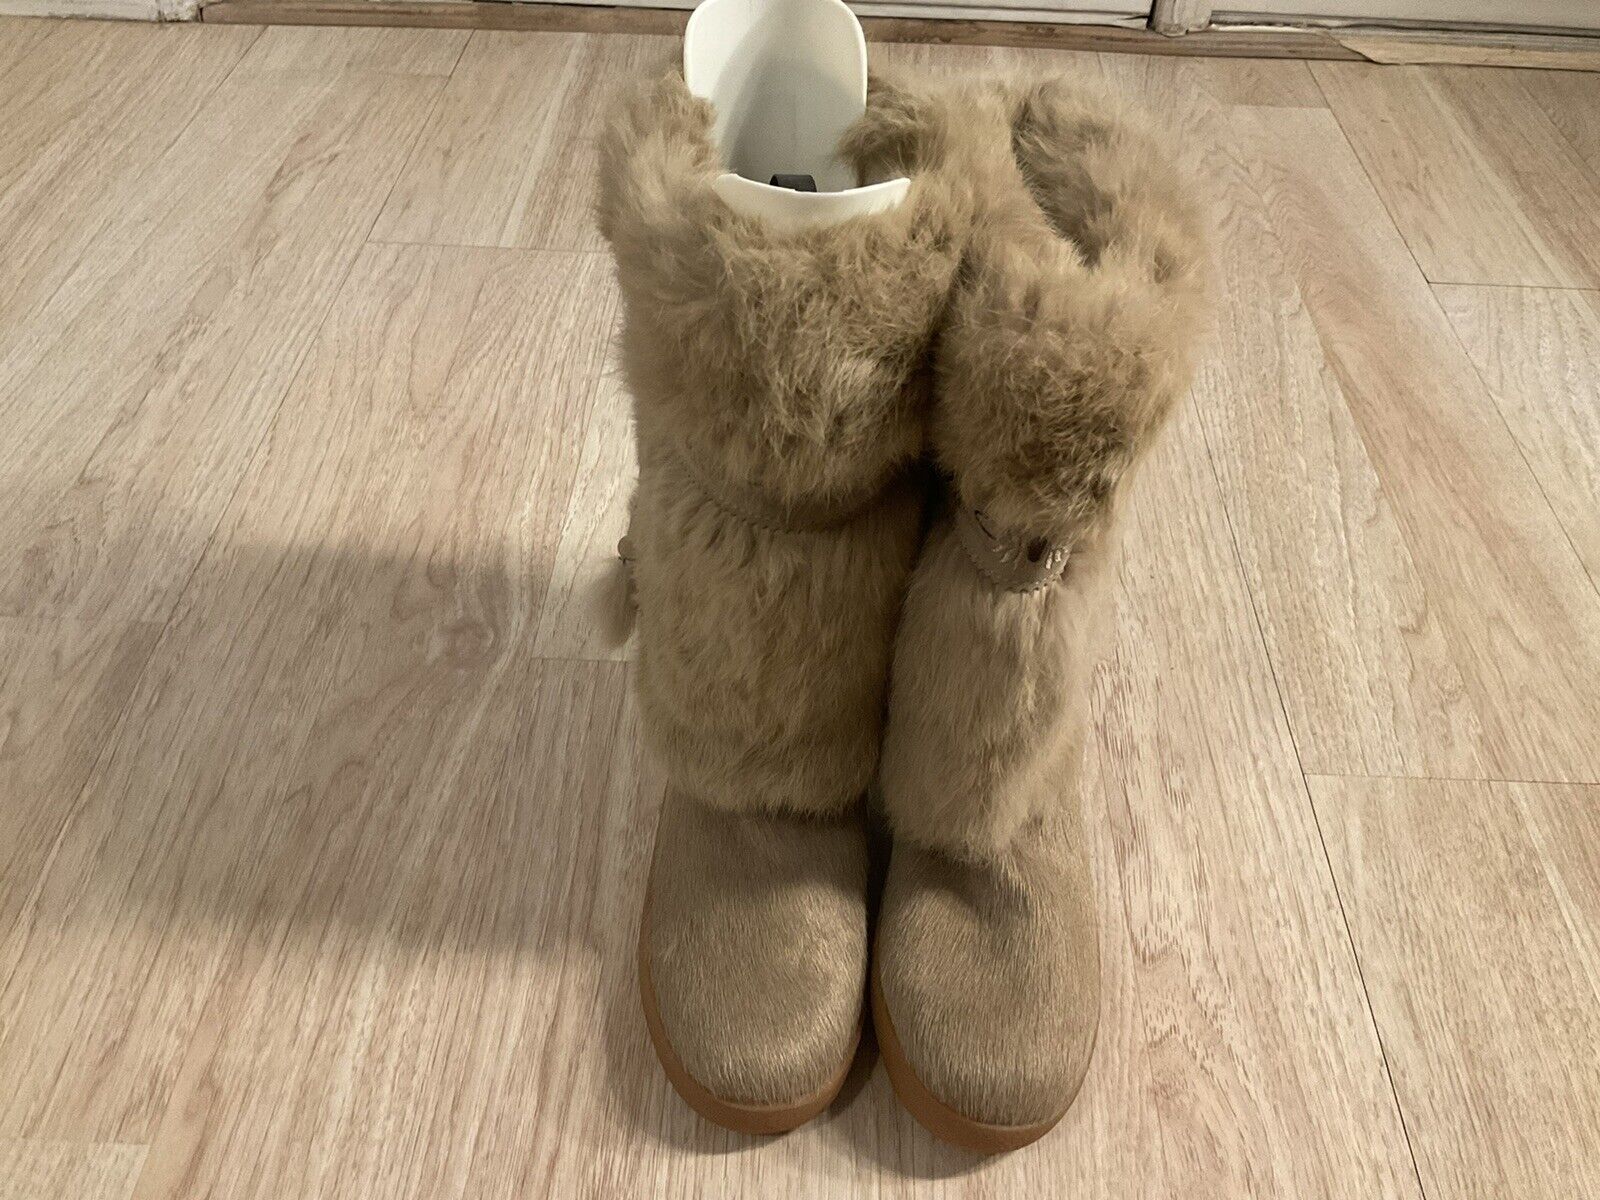 Primary image for Linda Boots Beige Tan Fur Size 38 Leather Wool Rubber Women’s